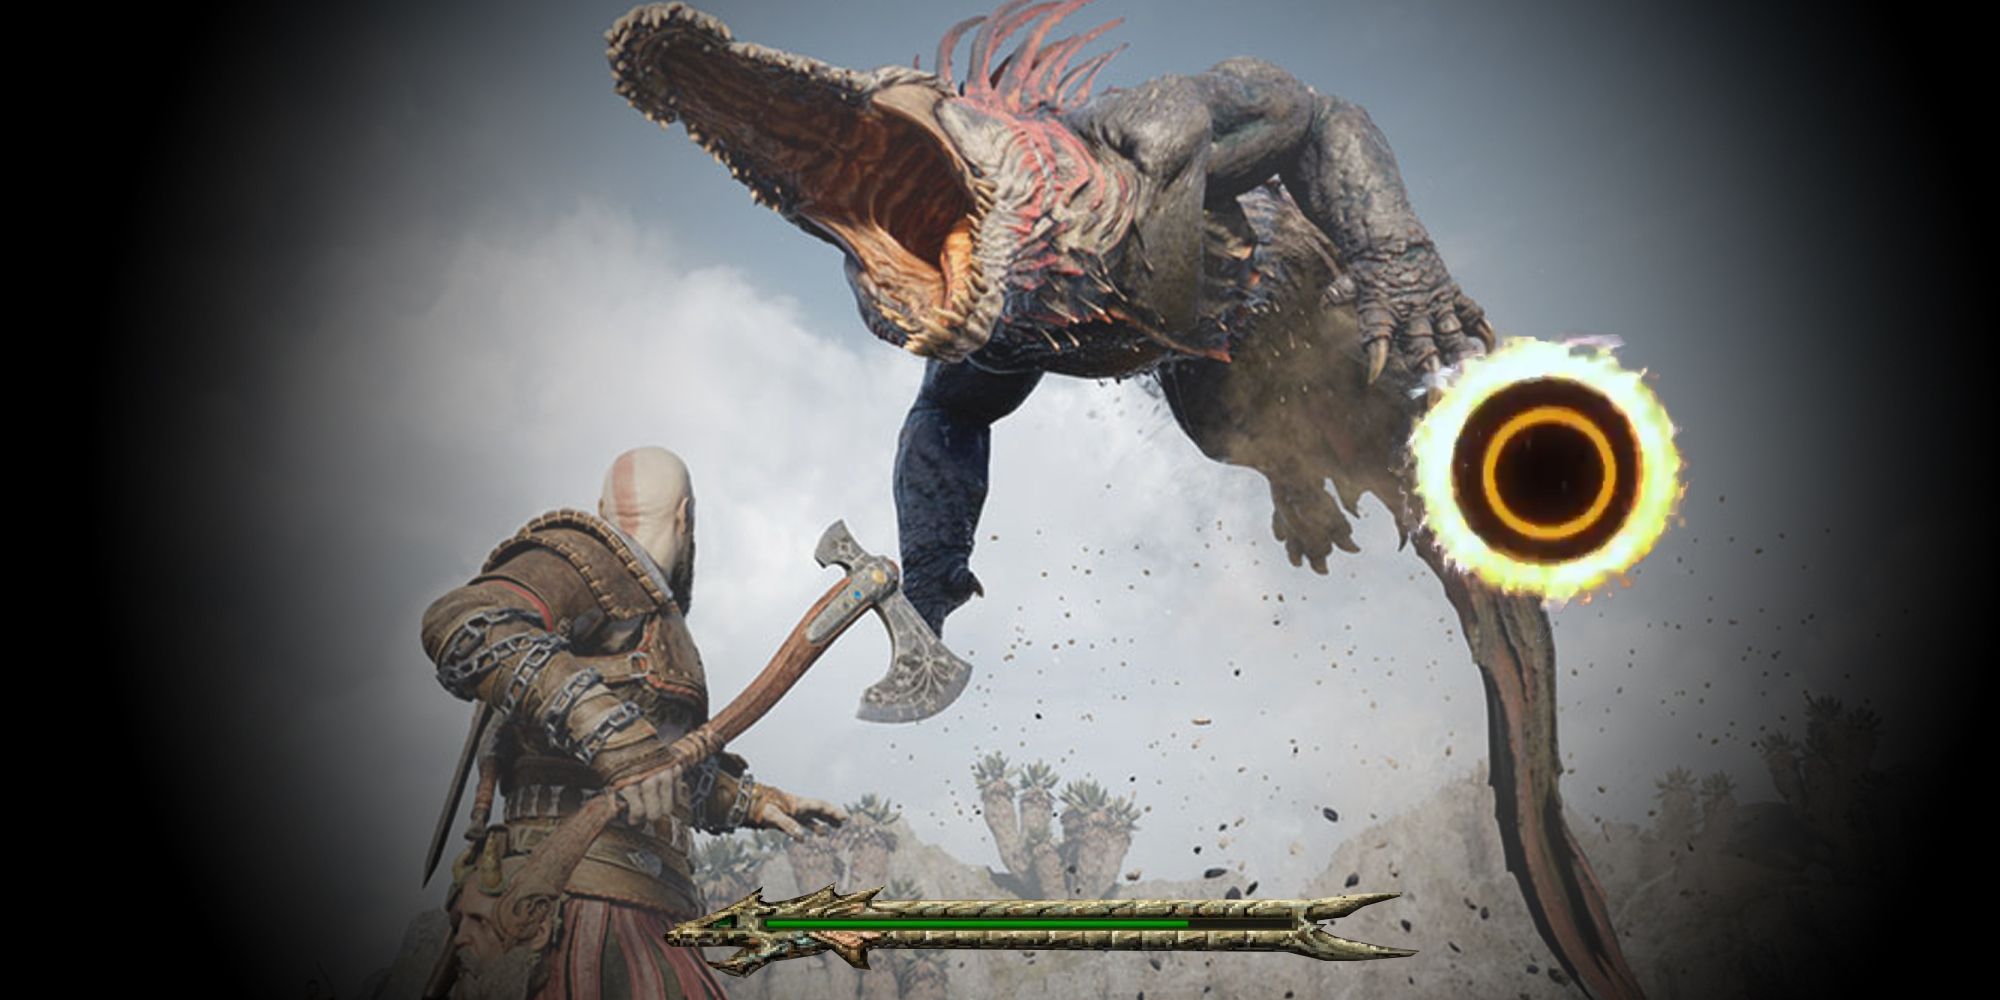 God of War kratos fighting a giant lizard monster and a circle button prompt appears